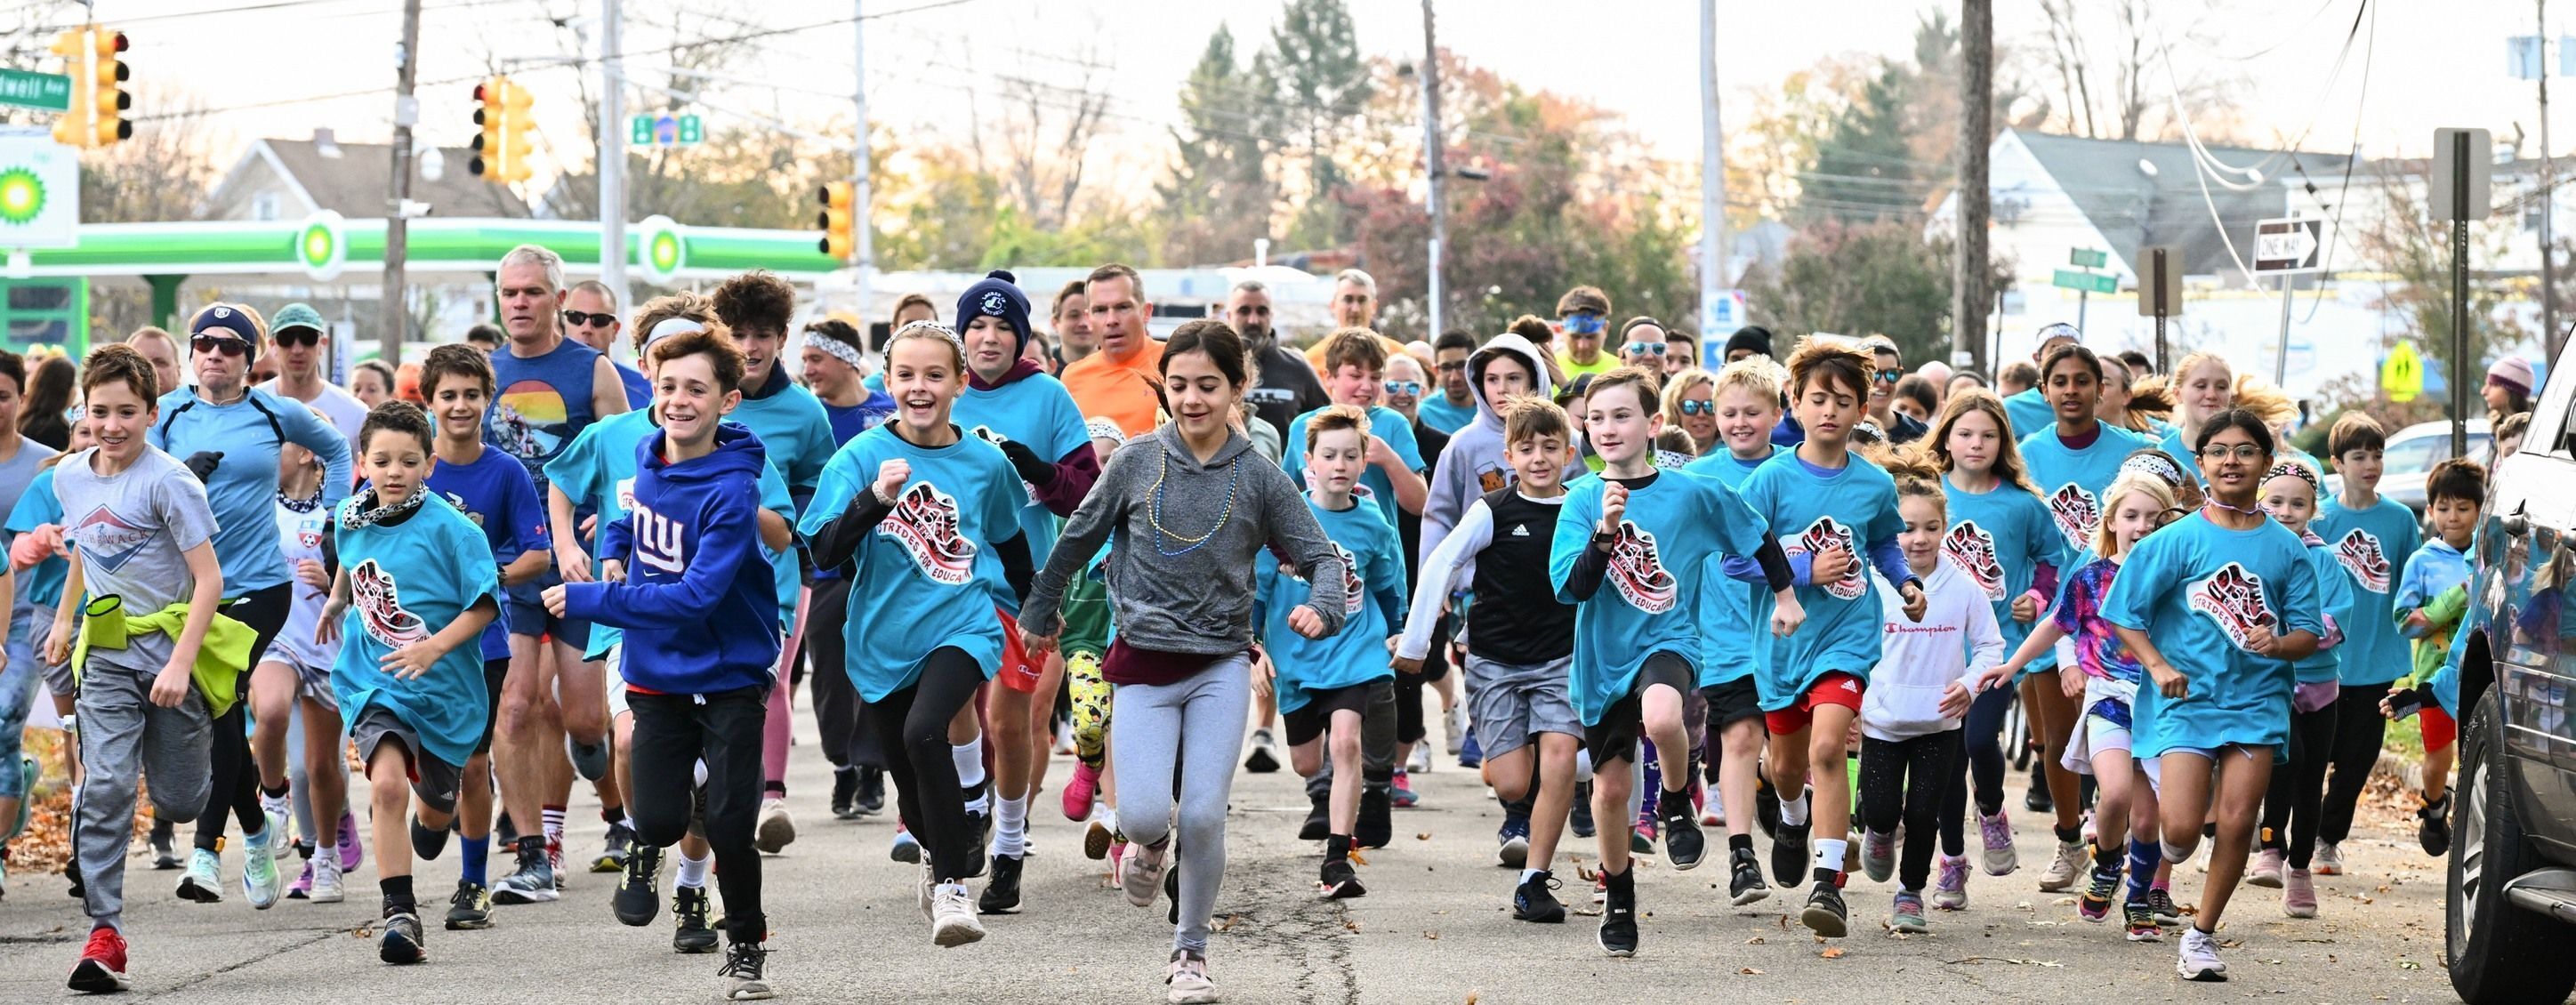 Strides for Education 5k Run/Walk to support the Education Foundation of Morris Plains